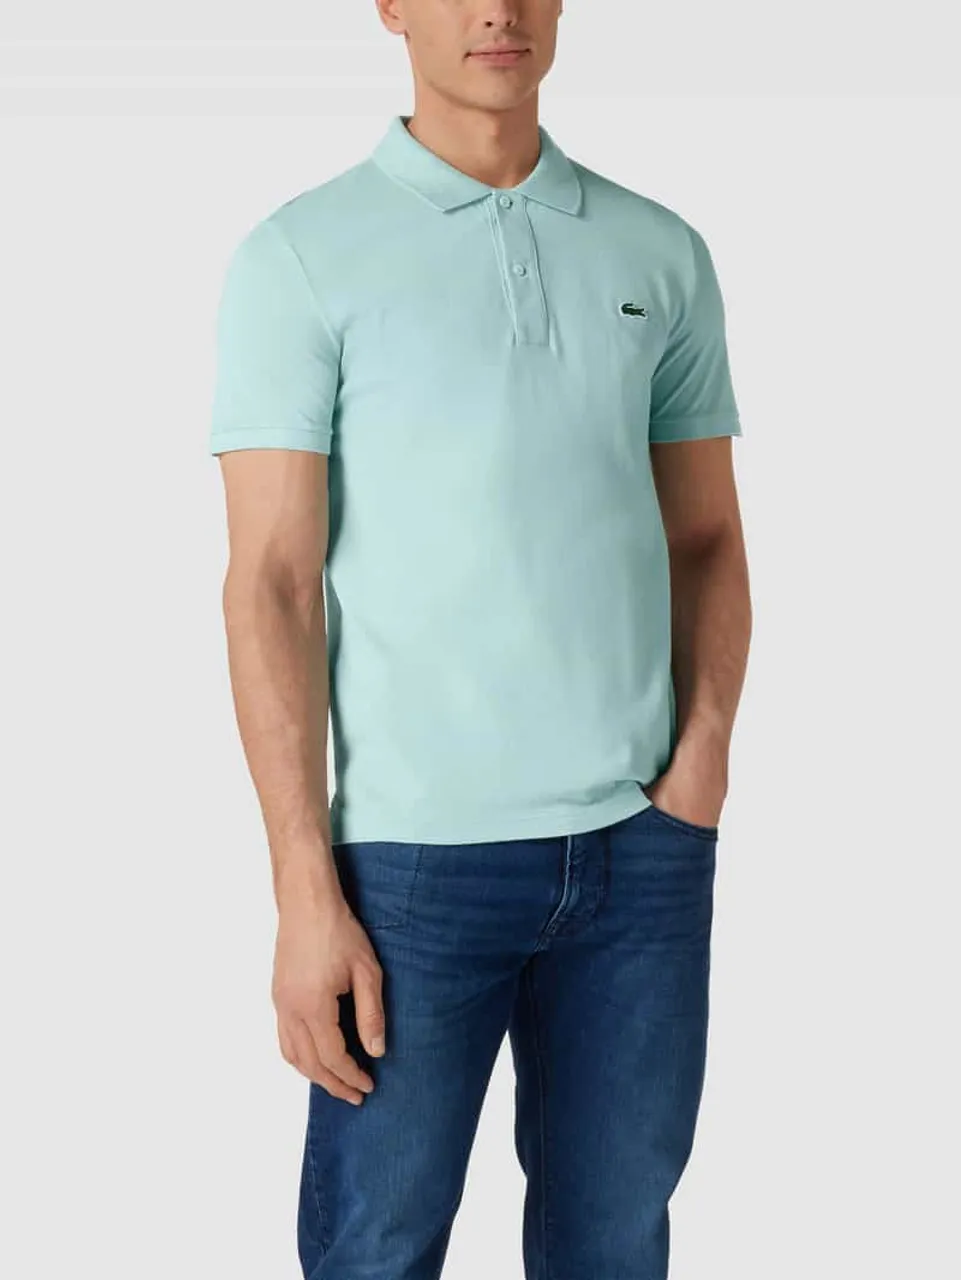 Lacoste Poloshirt mit Label-Stitching in Mint